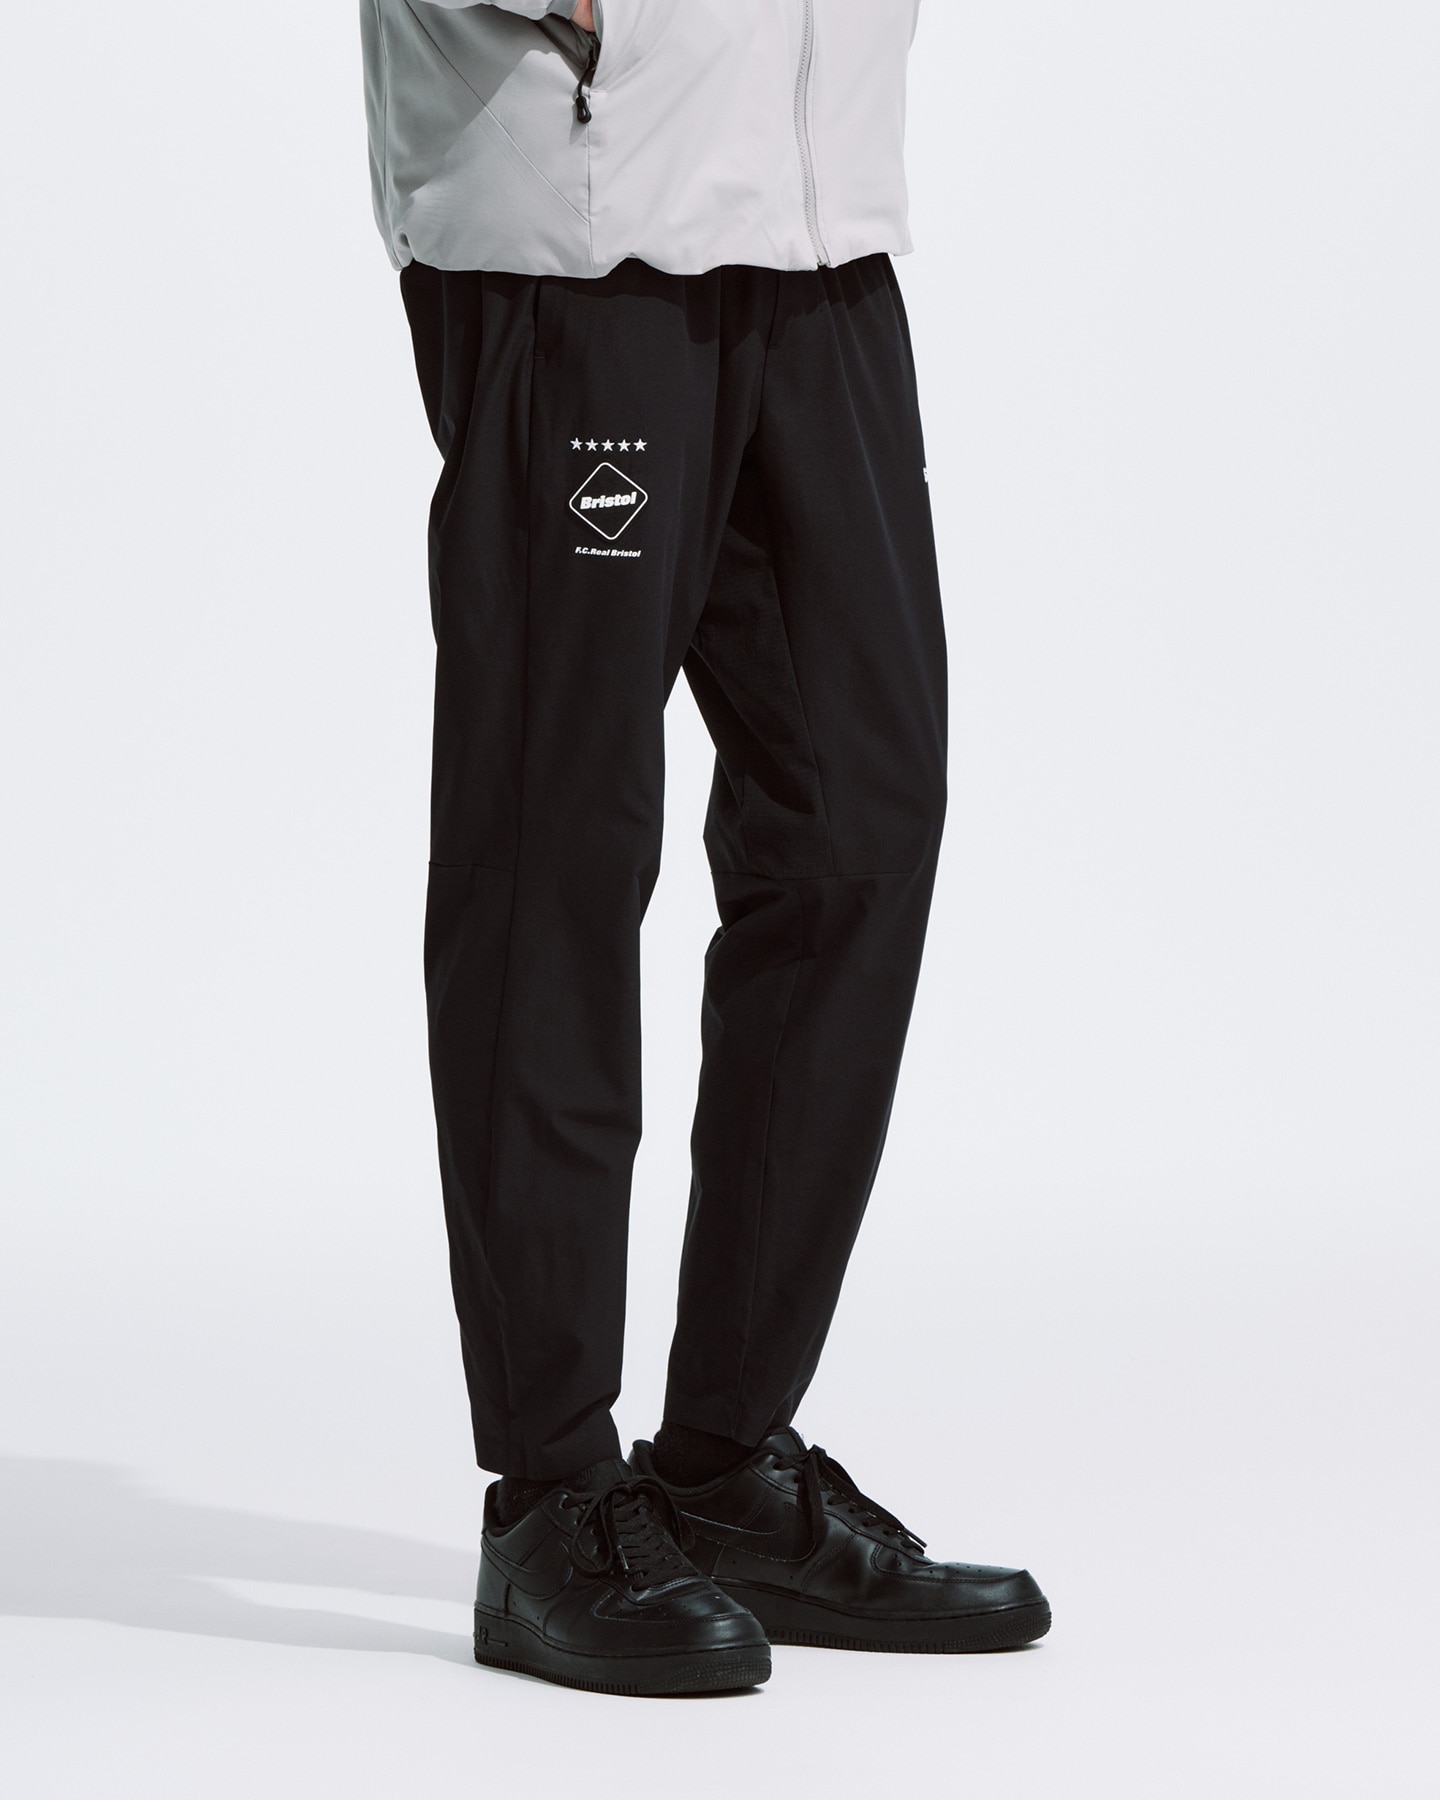 FCRB STRETCH LIGHT WEIGHT JOGGER PANTSNEIGHBO